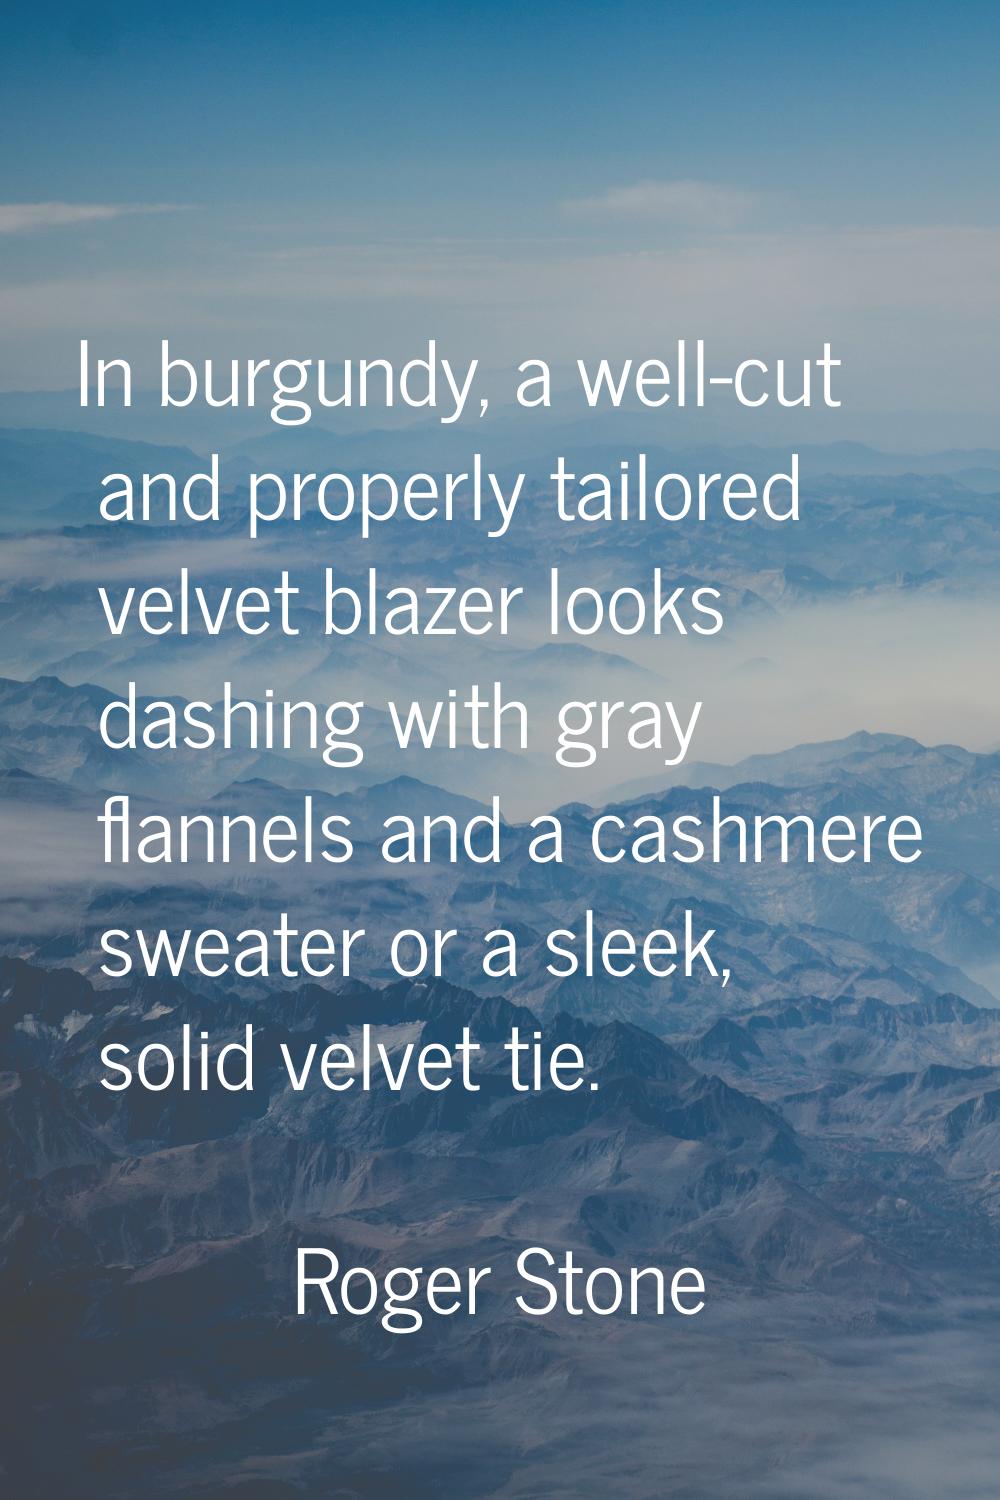 In burgundy, a well-cut and properly tailored velvet blazer looks dashing with gray flannels and a 